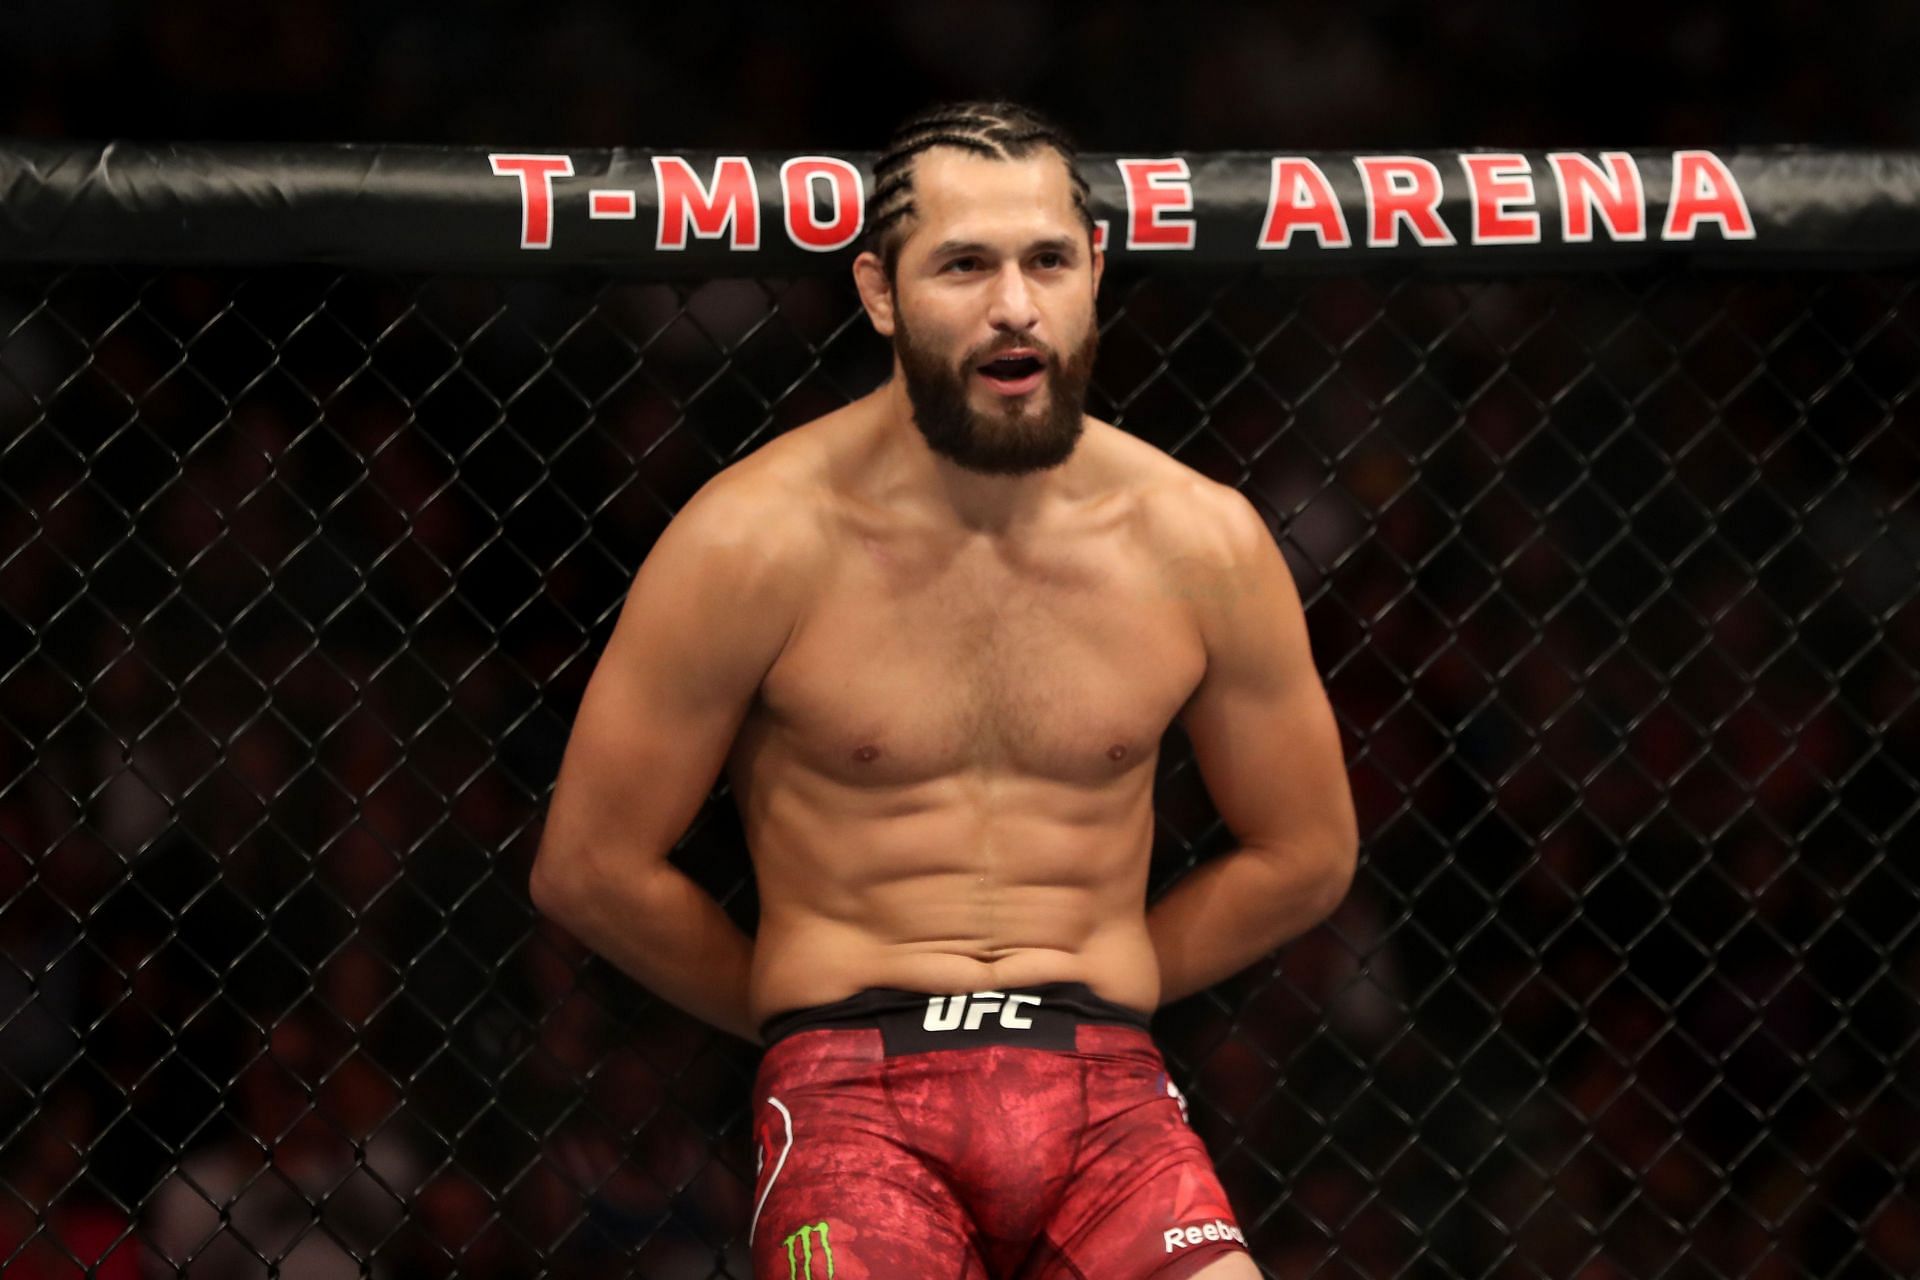 Jorge Masvidal holds a record of 35-16